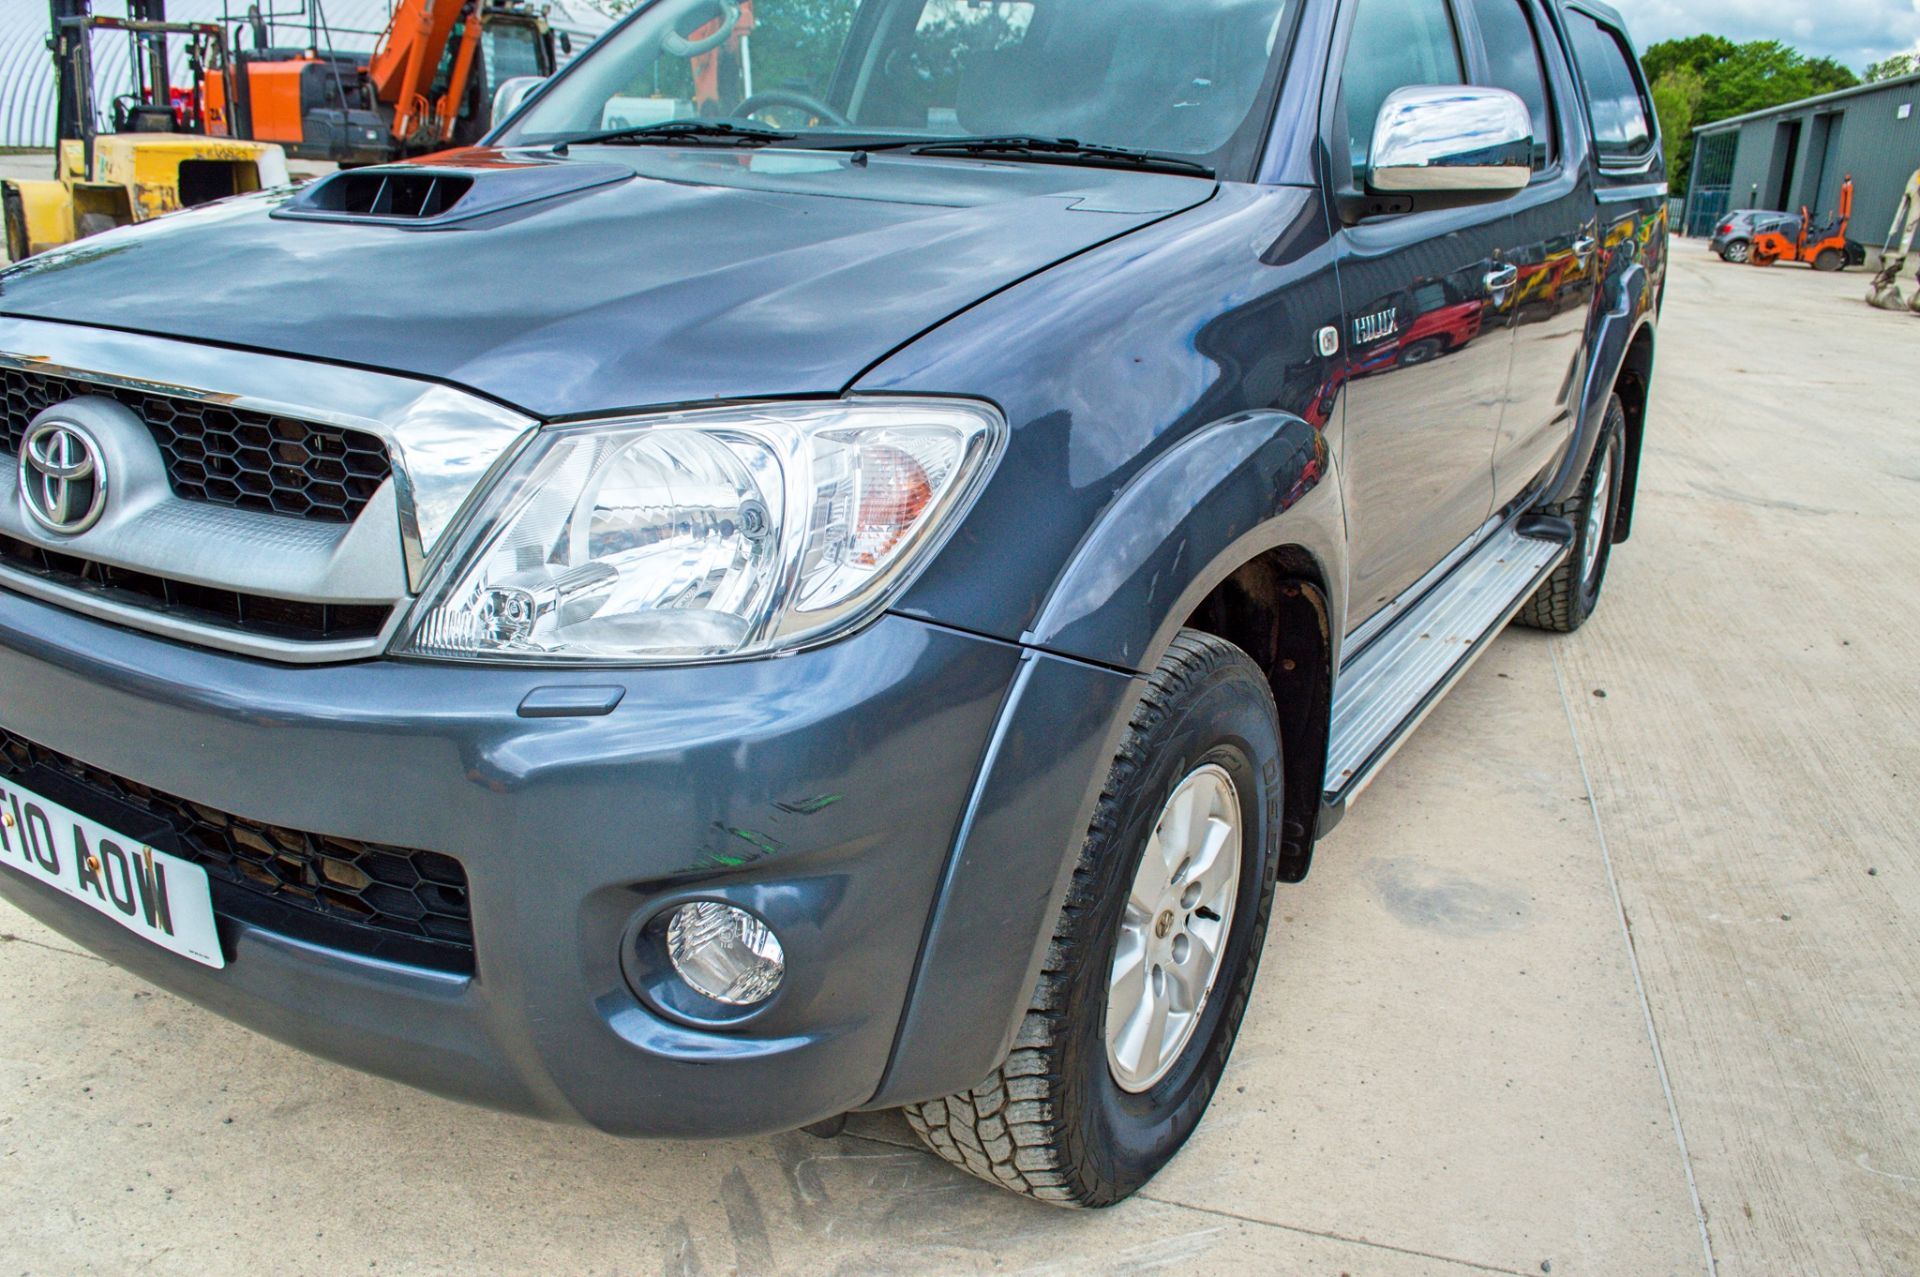 Toyota Hilux 2.5 D-4D 144 HL3 4wd manual double cab pick up Reg No: ST10 AOW Date of Registration: - Image 10 of 25